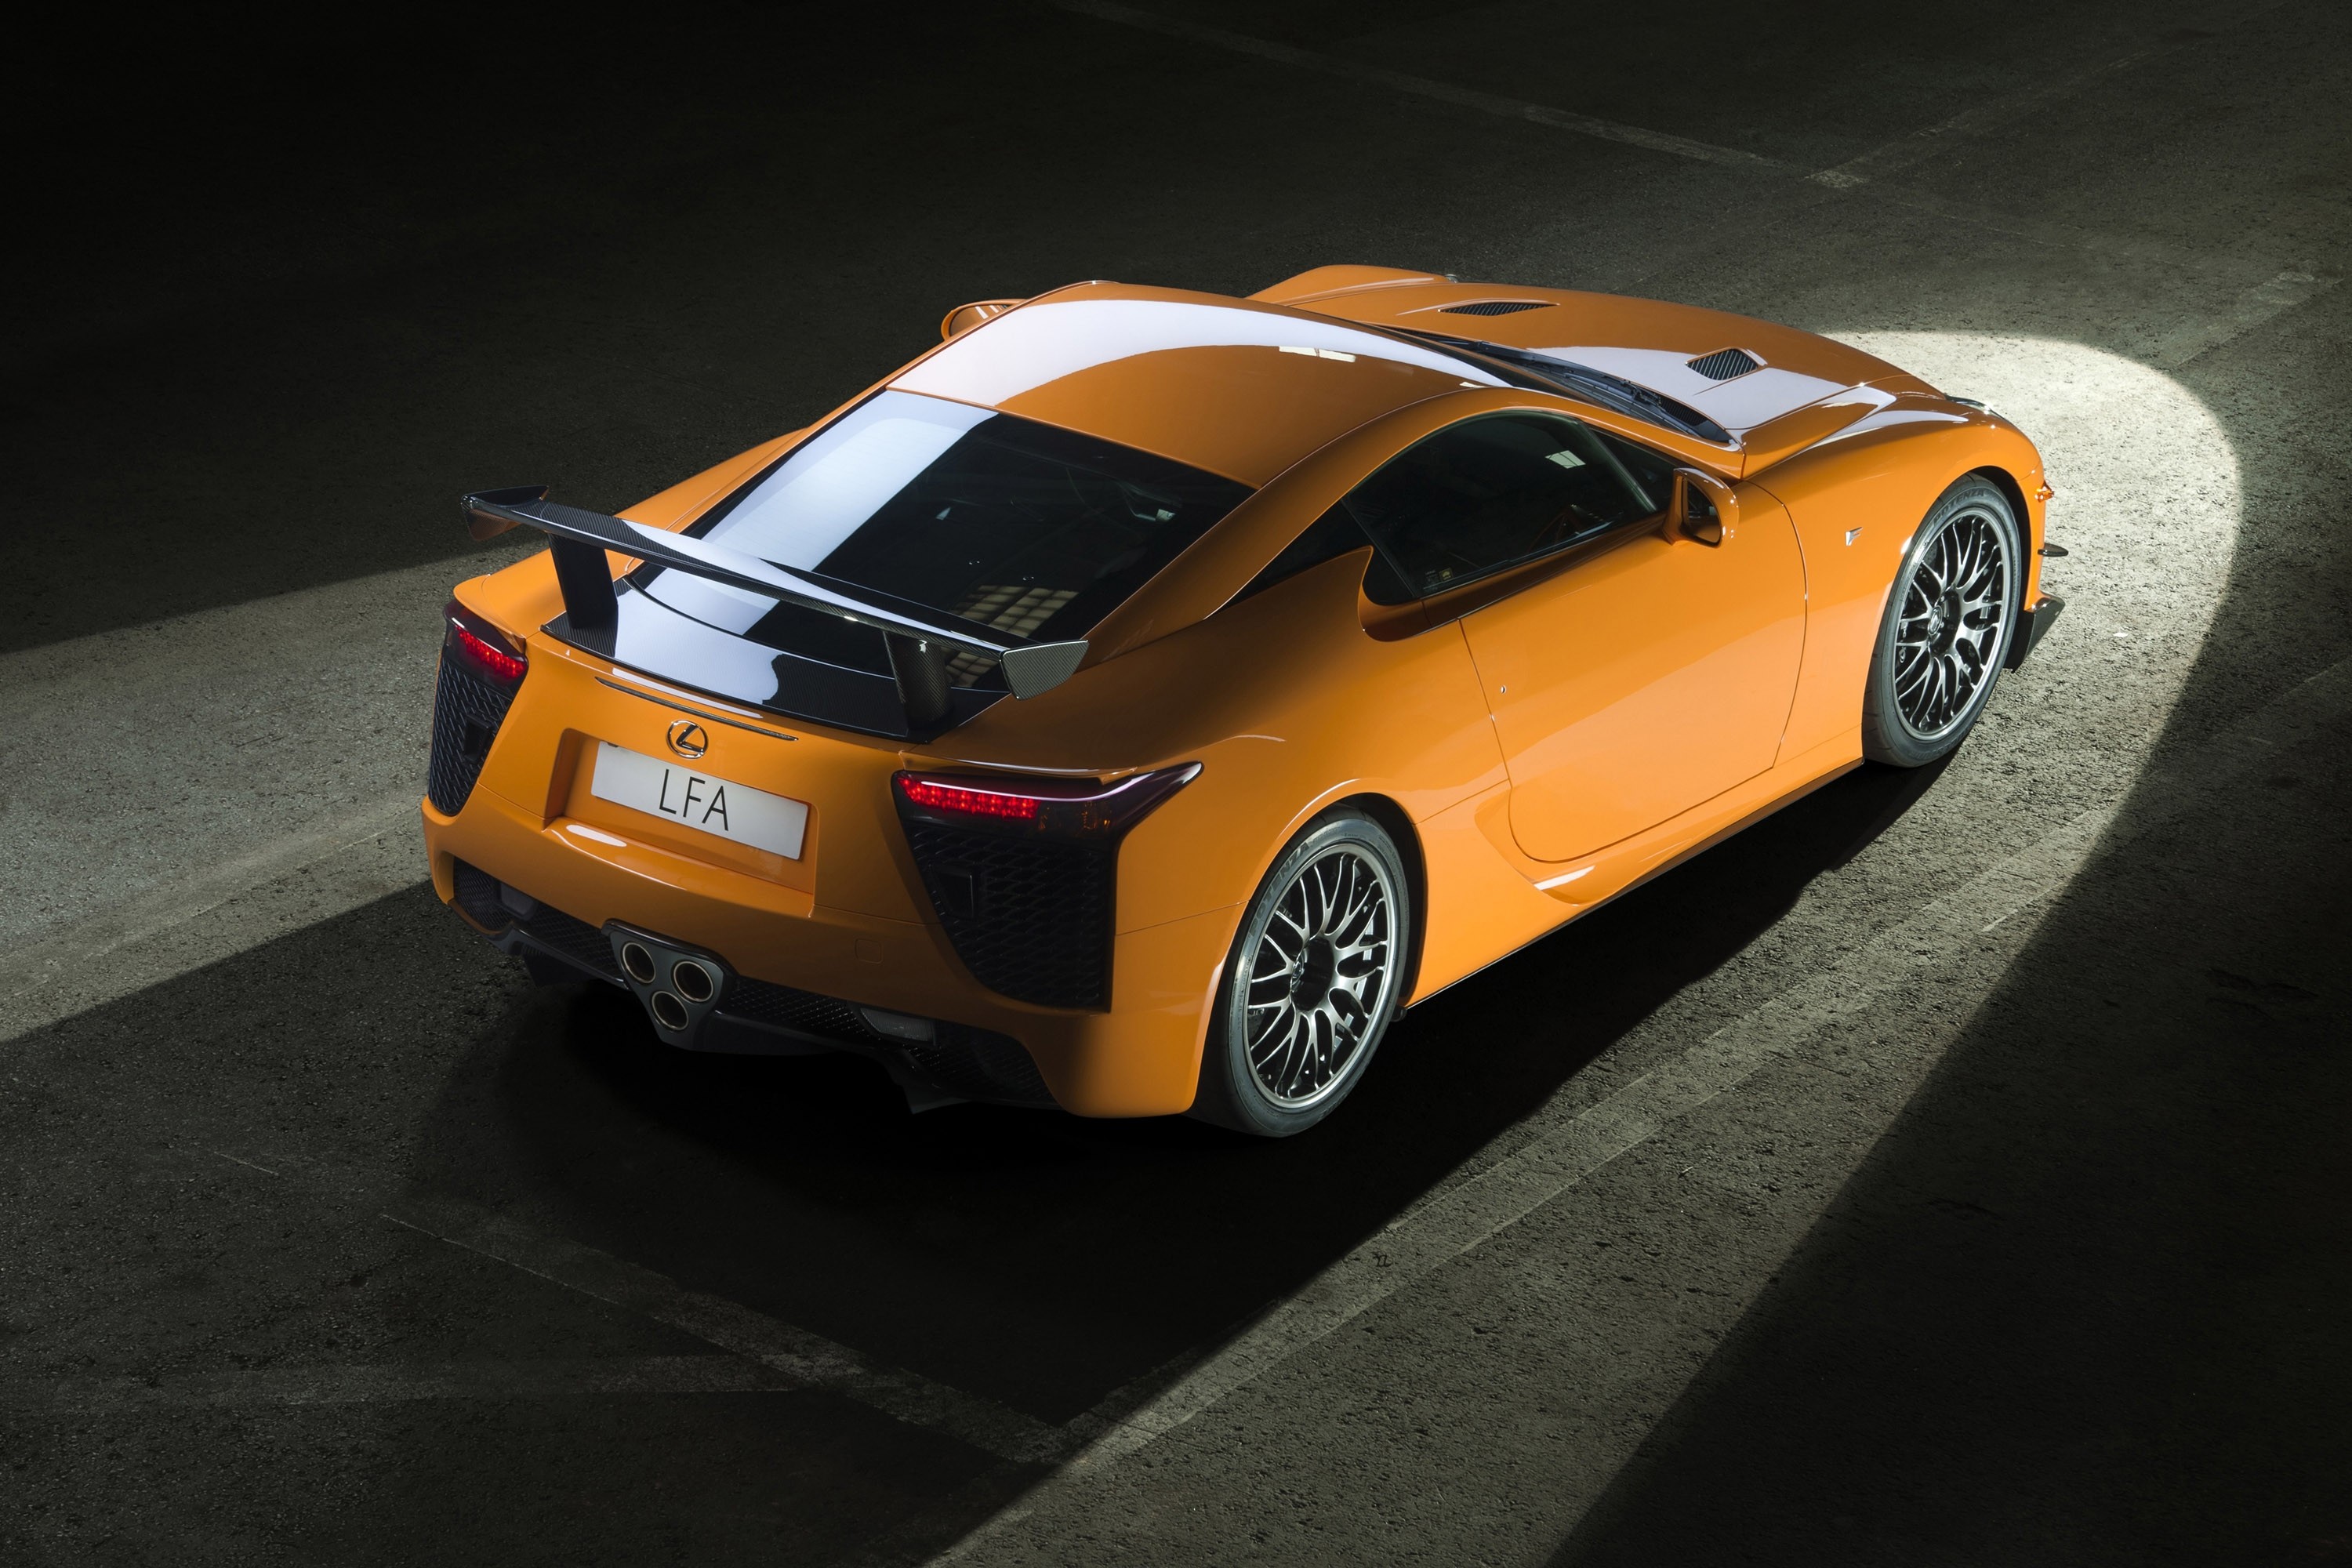 Lfa Rides Hd Wallpaper For Android Phone, Hd Car Images, - Lexus Lfa Fast Five , HD Wallpaper & Backgrounds